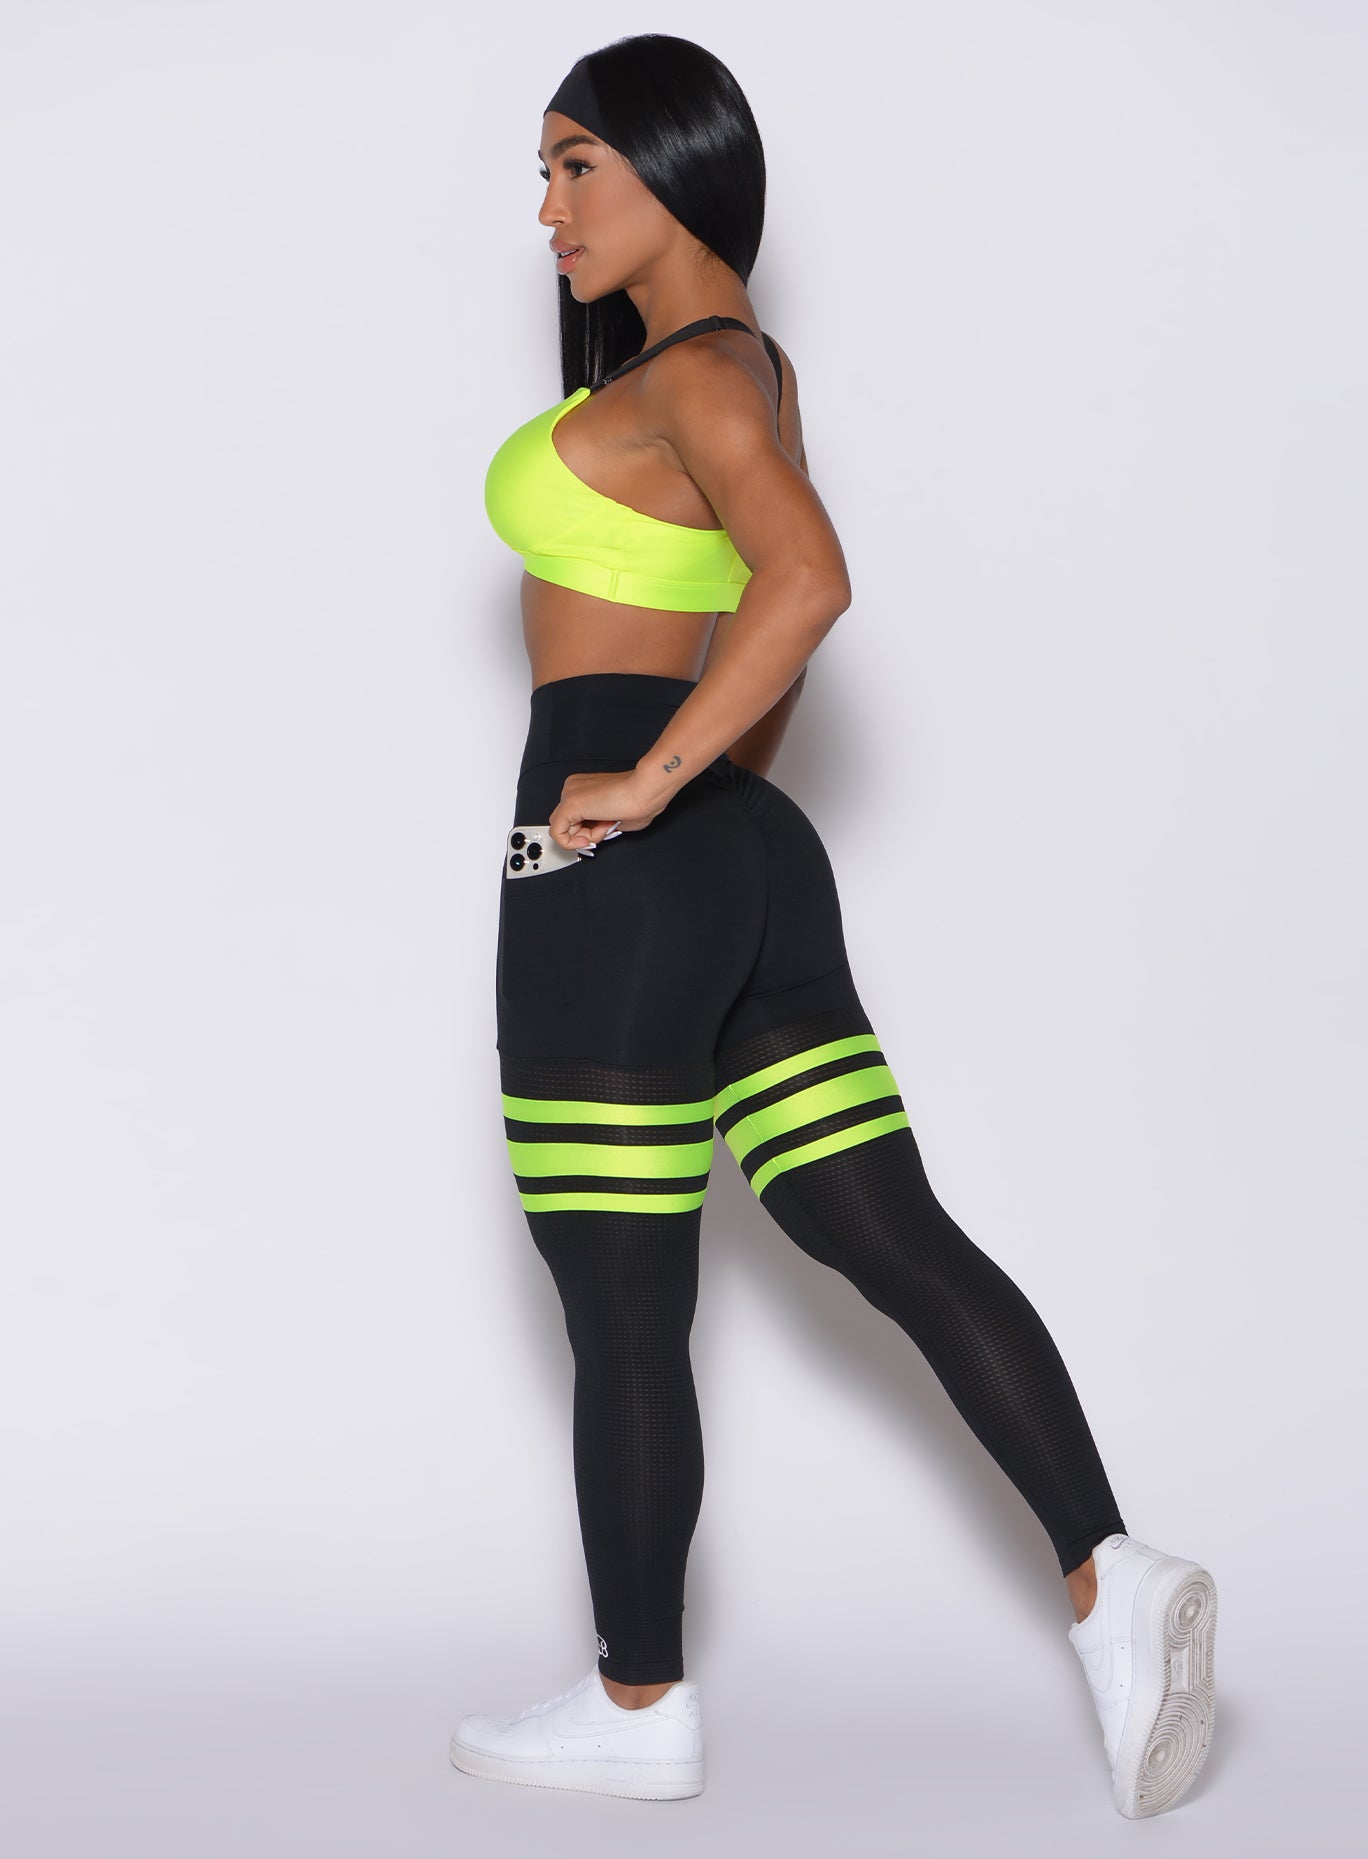 Left side profile view of a model taking her phone out of her left pocket wearing our scrunch thigh high in black with neon yellow stripes on the thighs and a matching sports bra